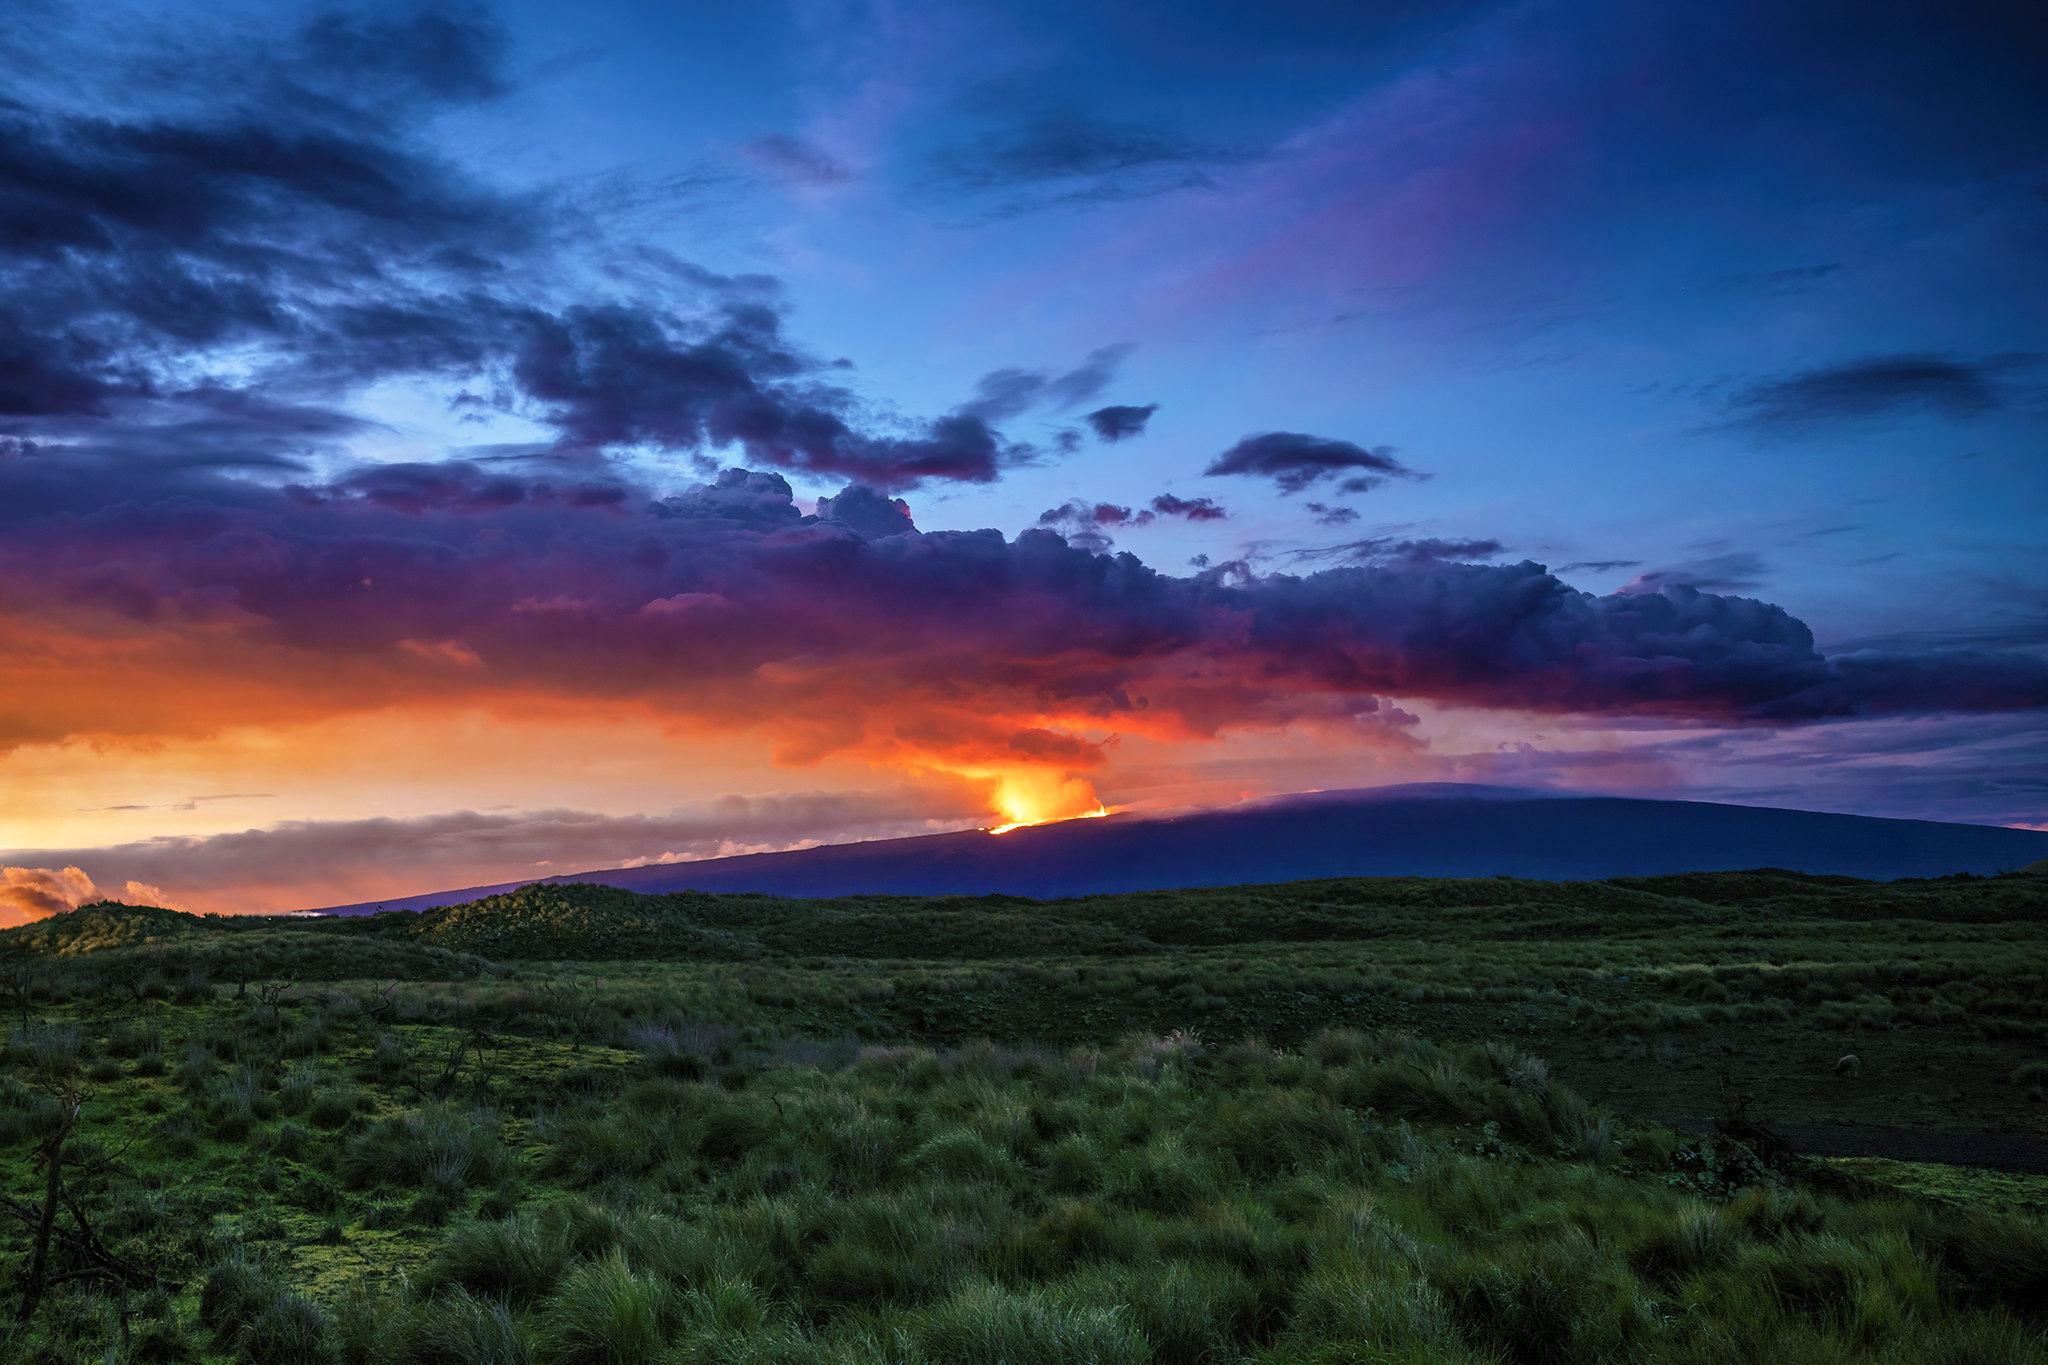 The Mauna Loa eruption as seen from Saddle Road/NPS, Janice Wei